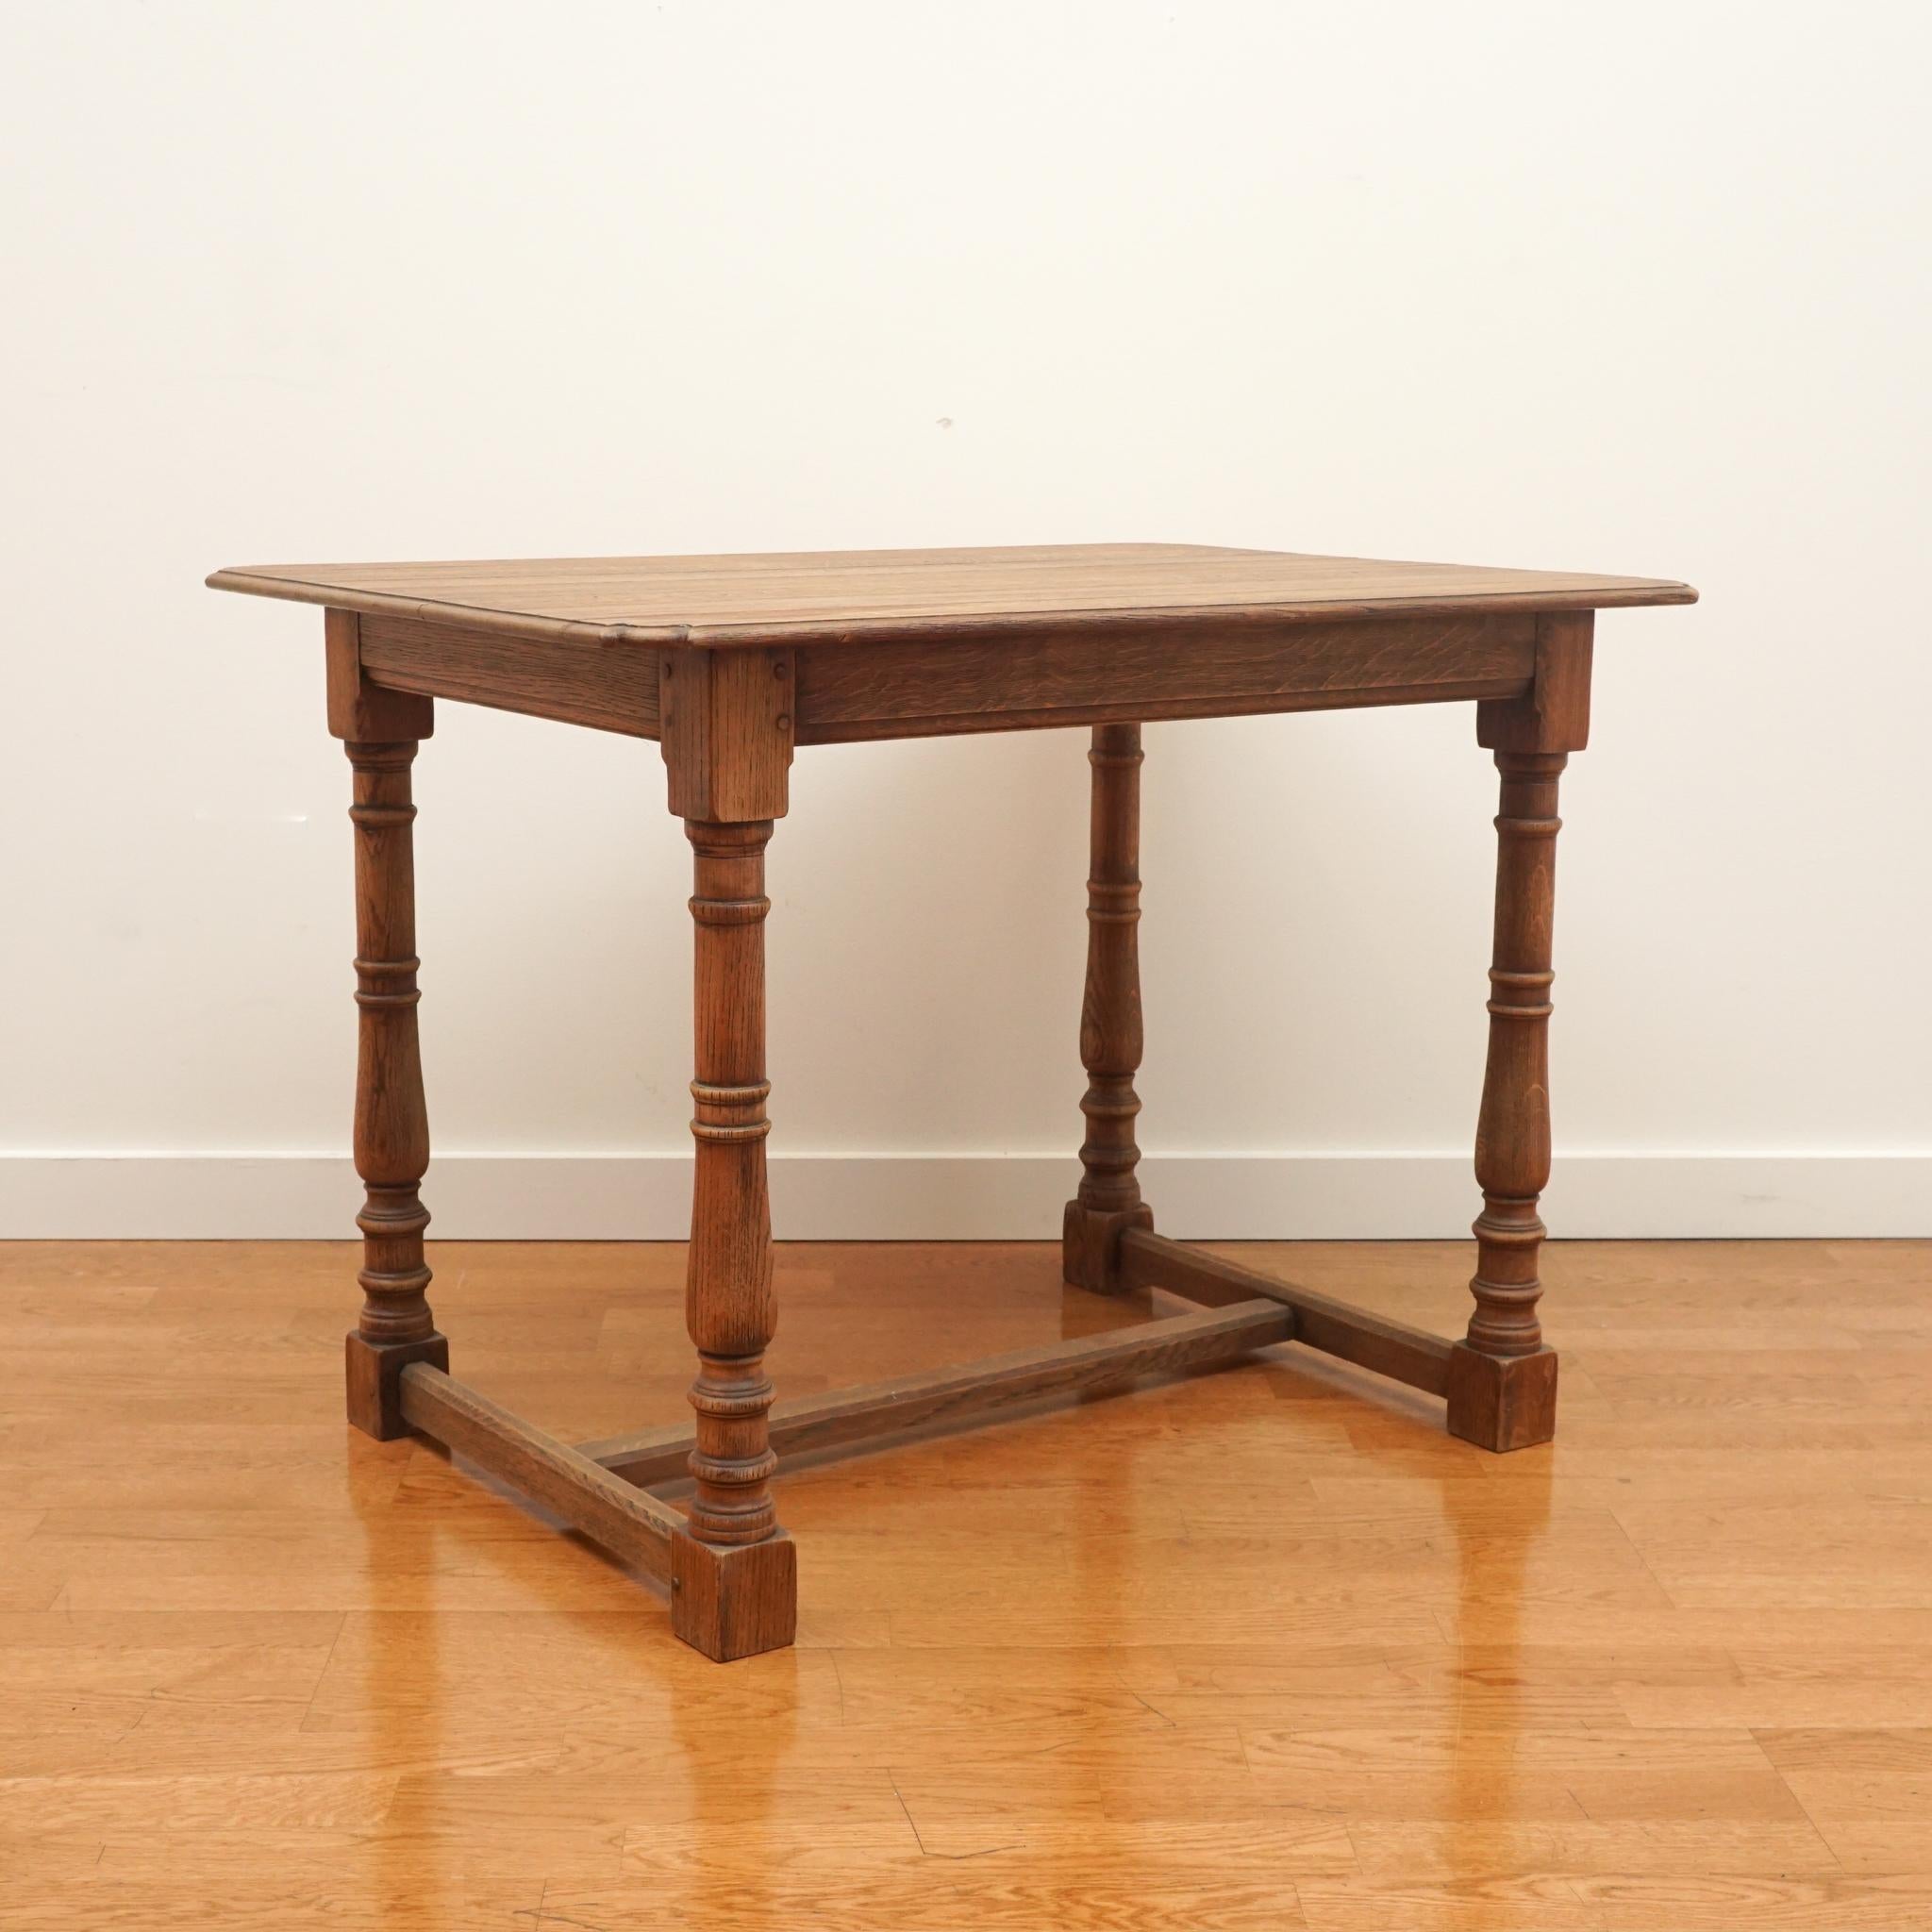  Beautiful wooden table with carved out corner details , turned legs and a low cross stretcher. Wonderful addition to any home.  